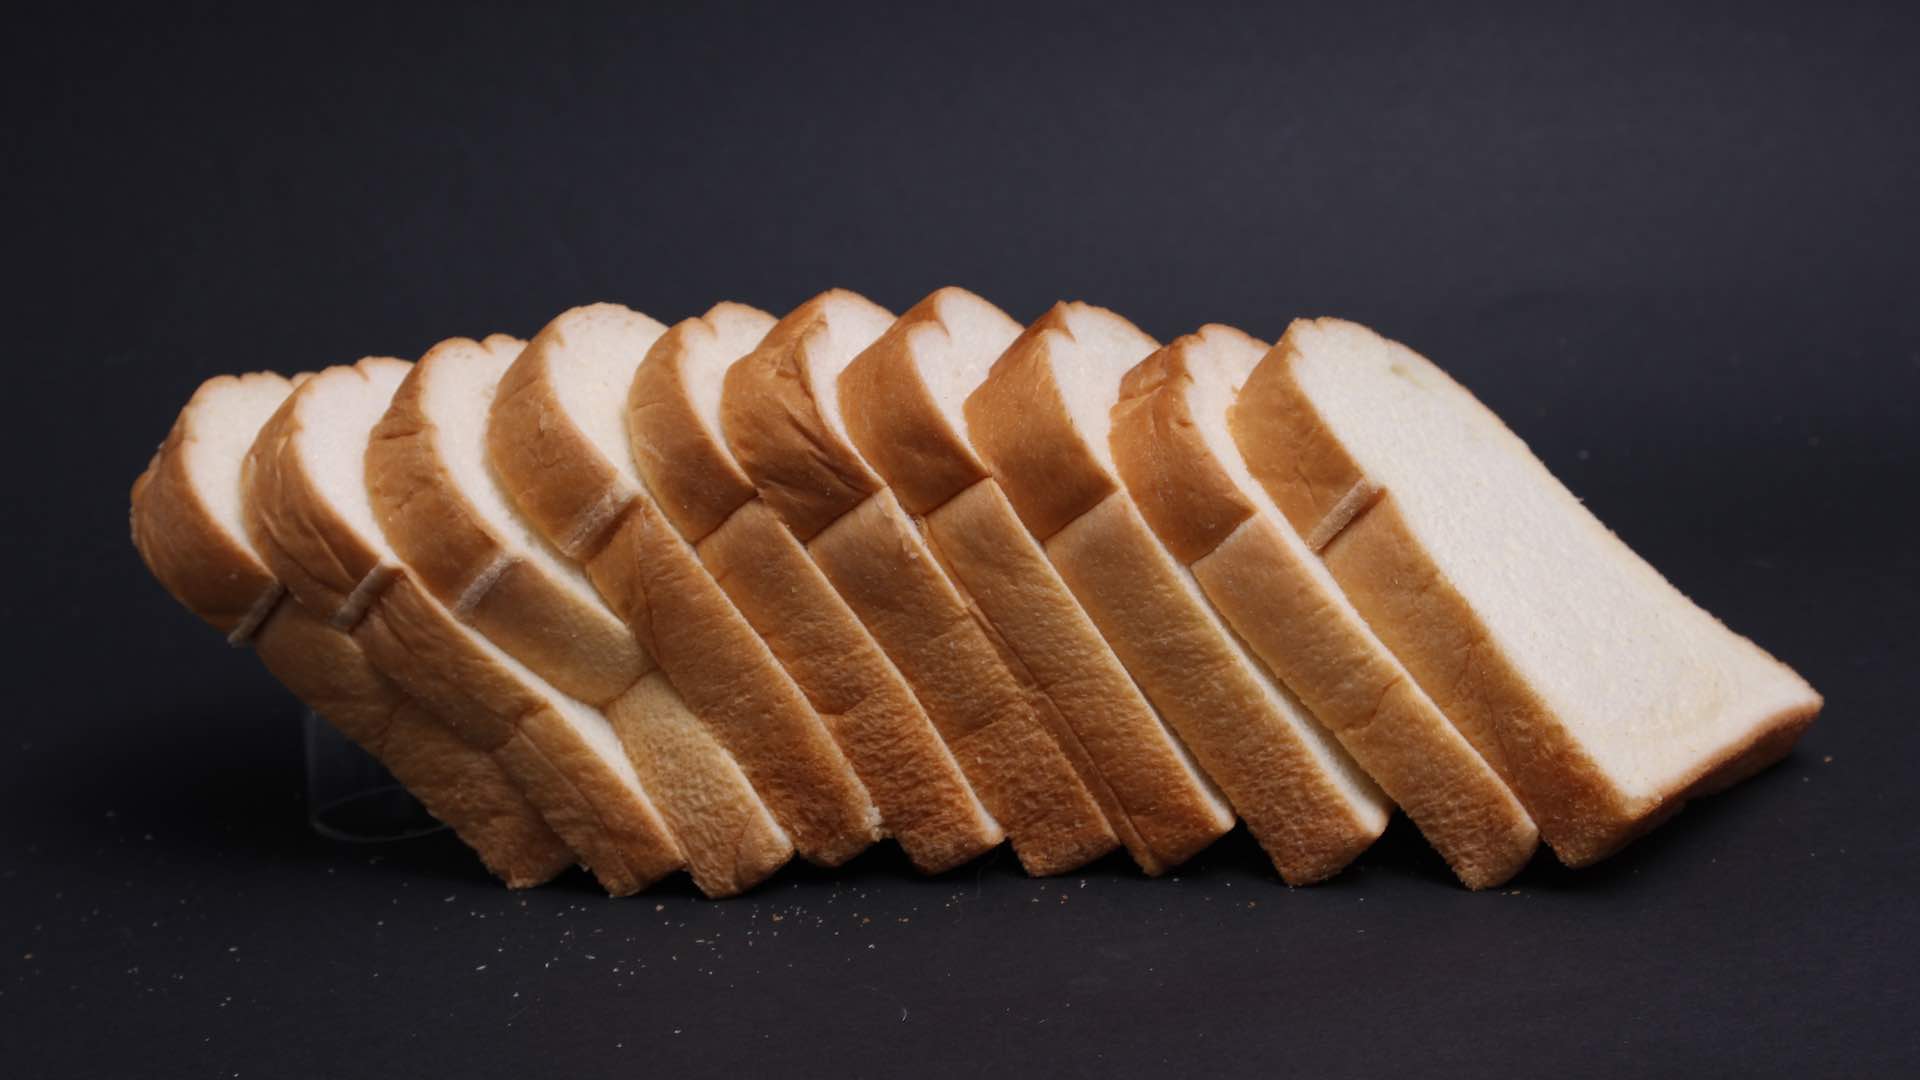 Japanese bread recall amid rat remains discovery